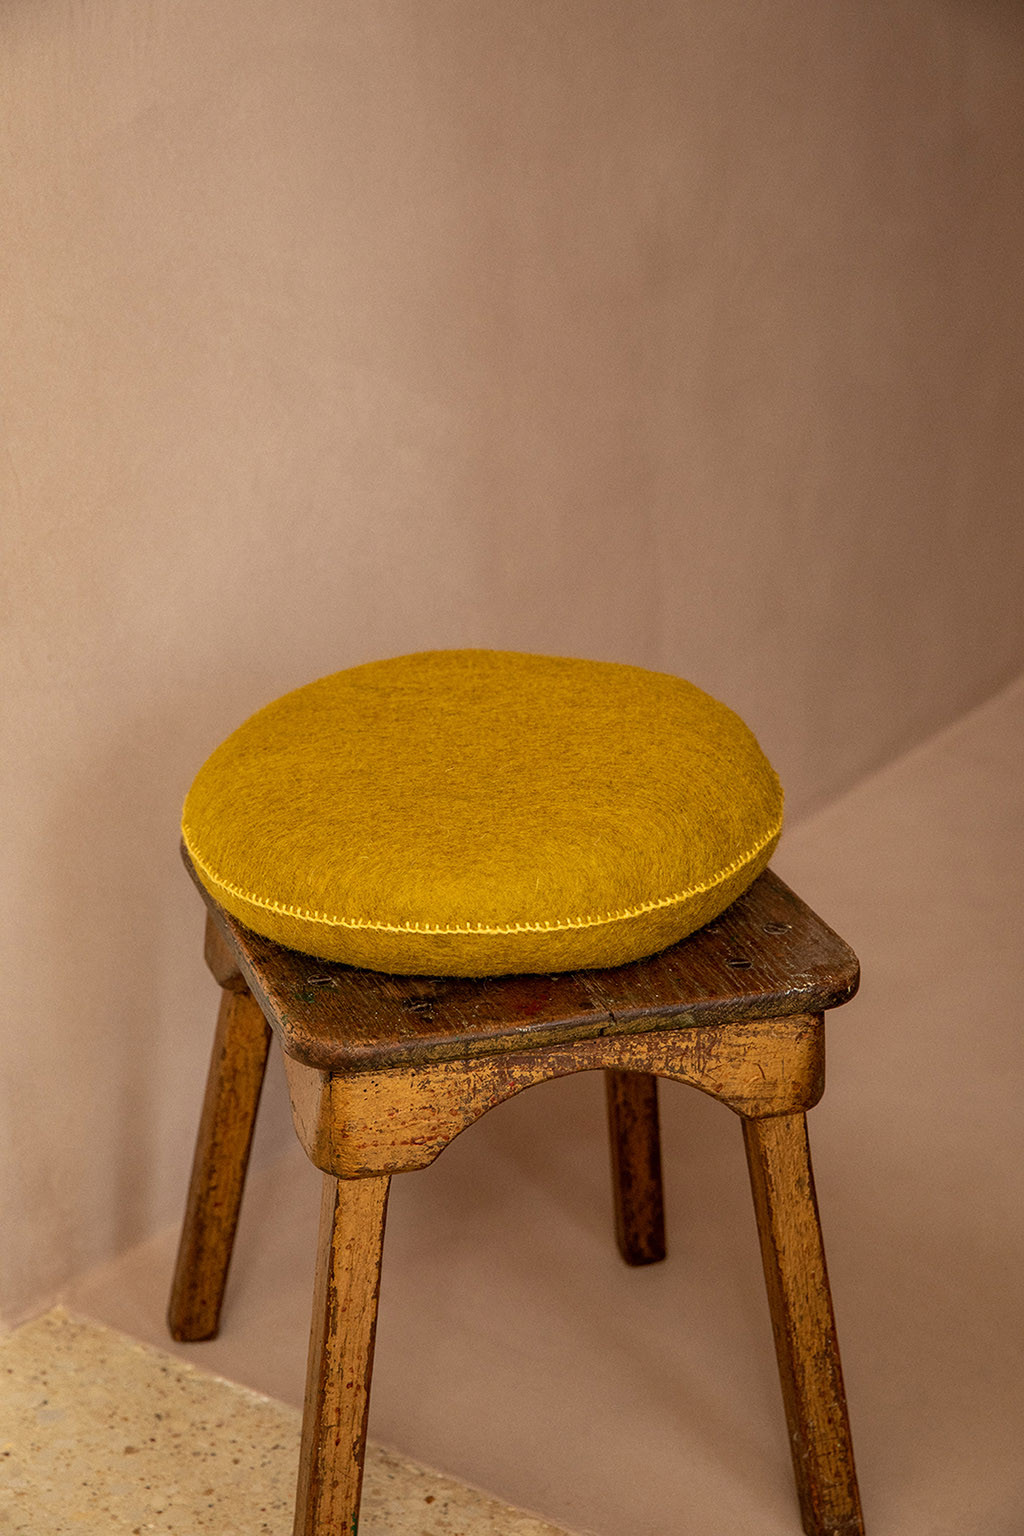 A pistachio cushion in boiled wool on a wooden stool